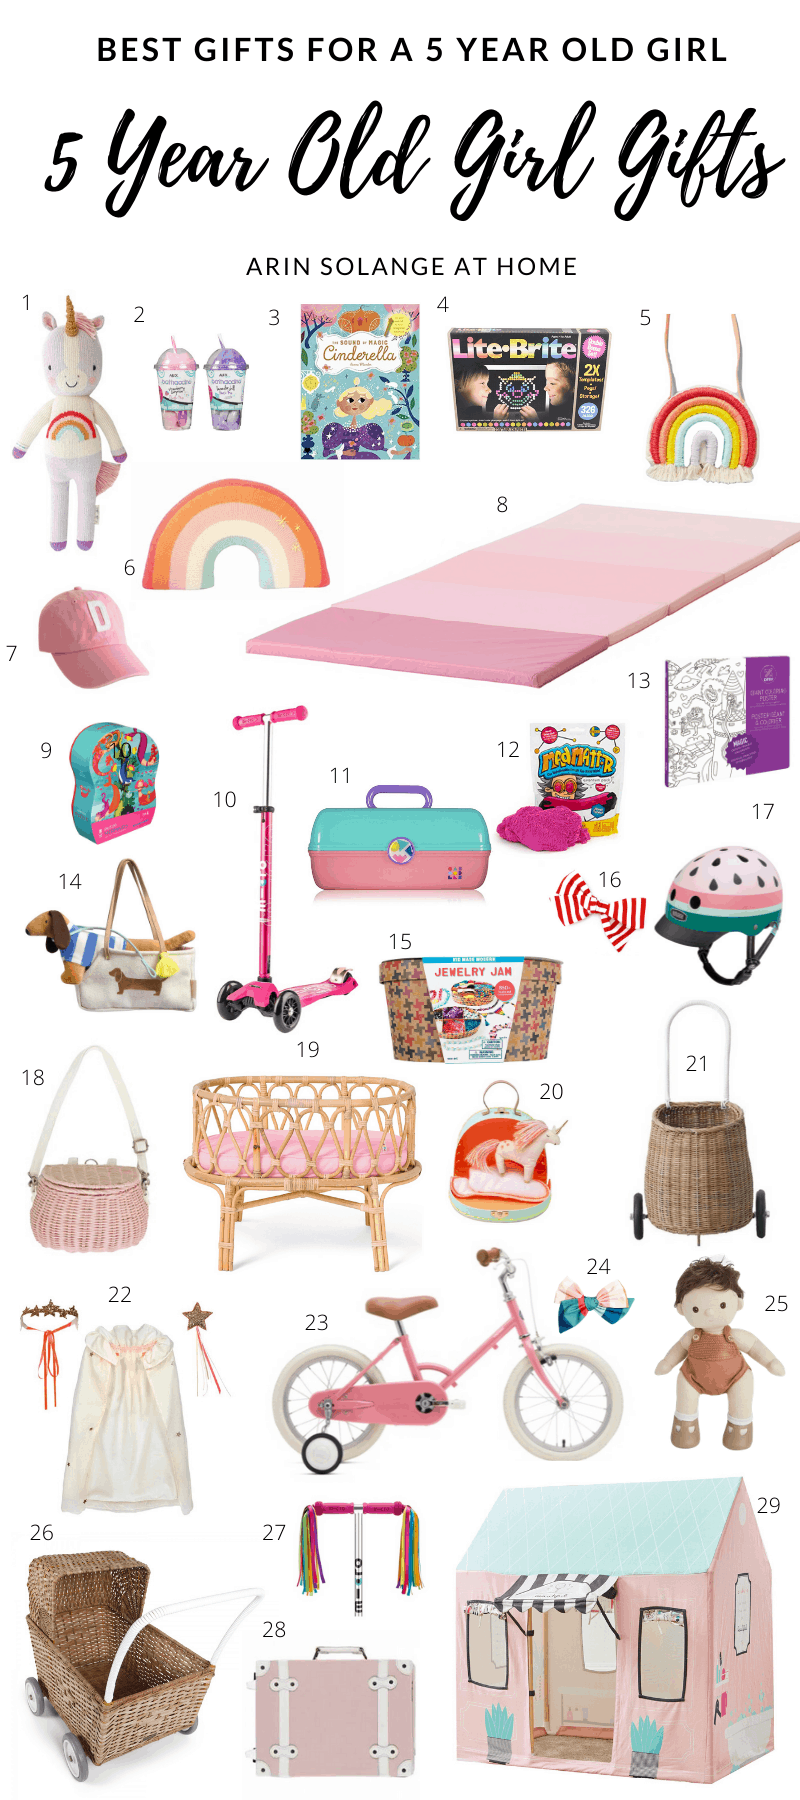 best gifts for 5 year old girl 2019